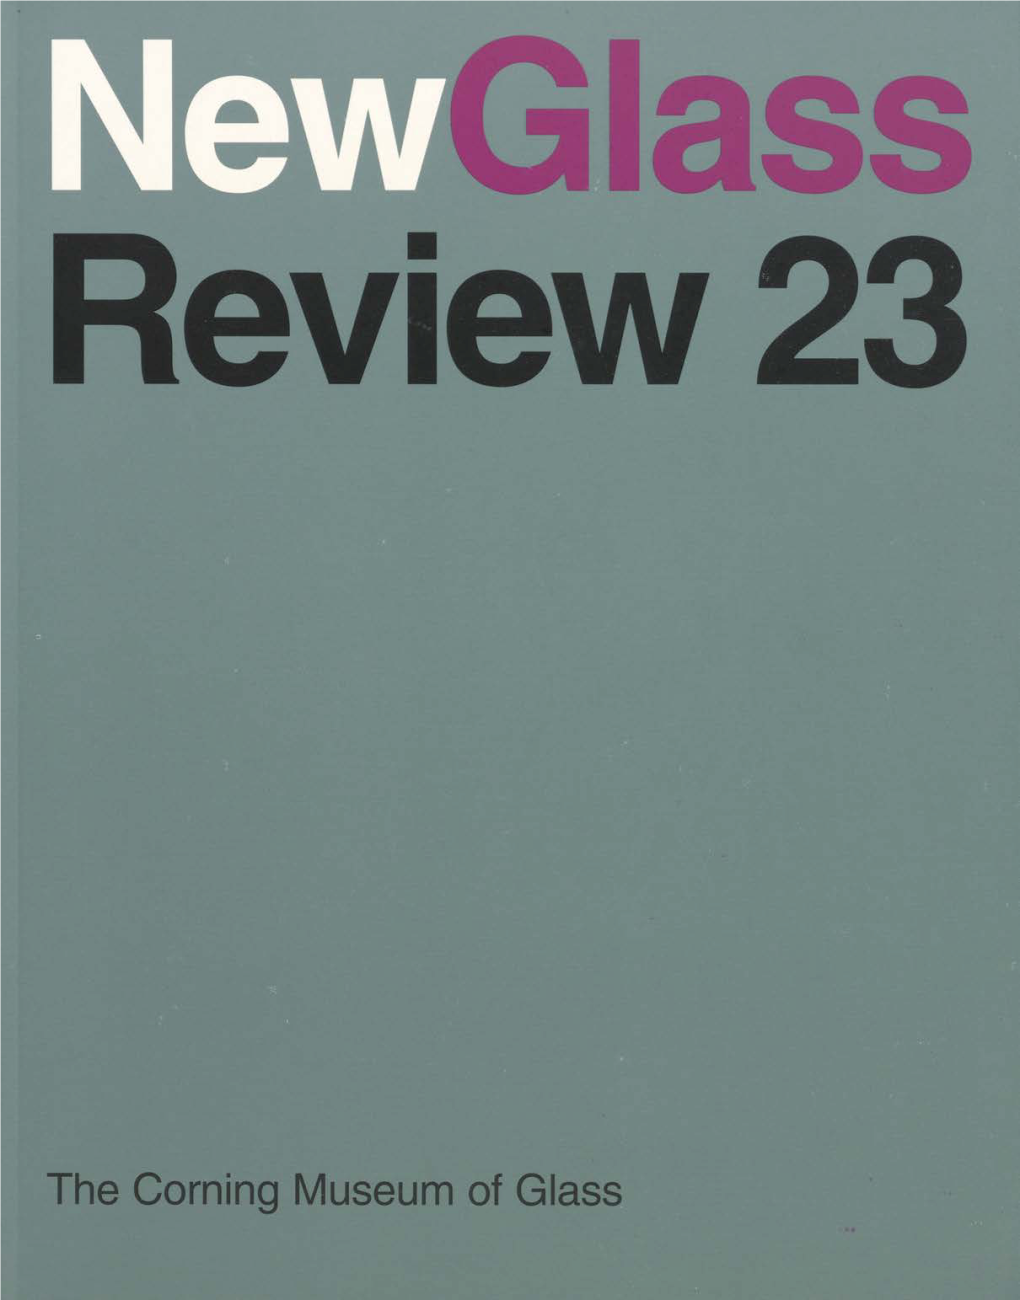 The Coming Museum of Glass Newglass Review 23